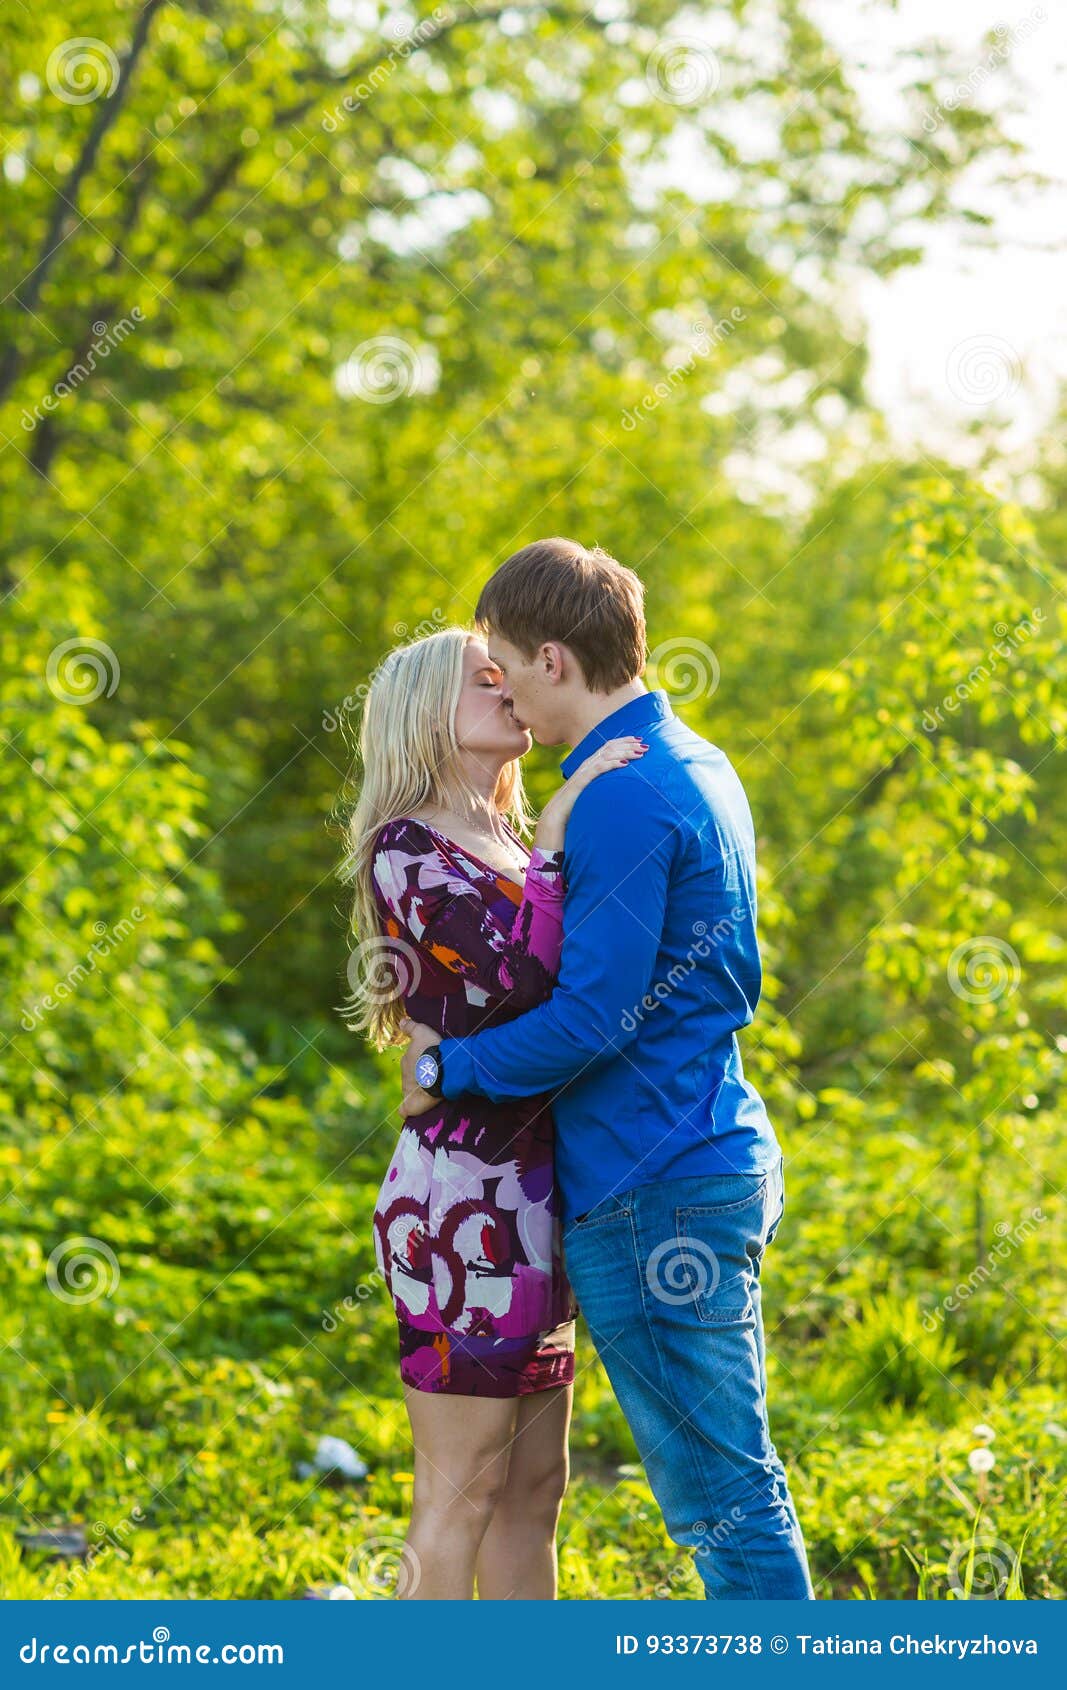 Romantic Happy Couple in Love on Man and Woman Kissing Summer Park. Stock Photo - Image of love, dress: 93373738